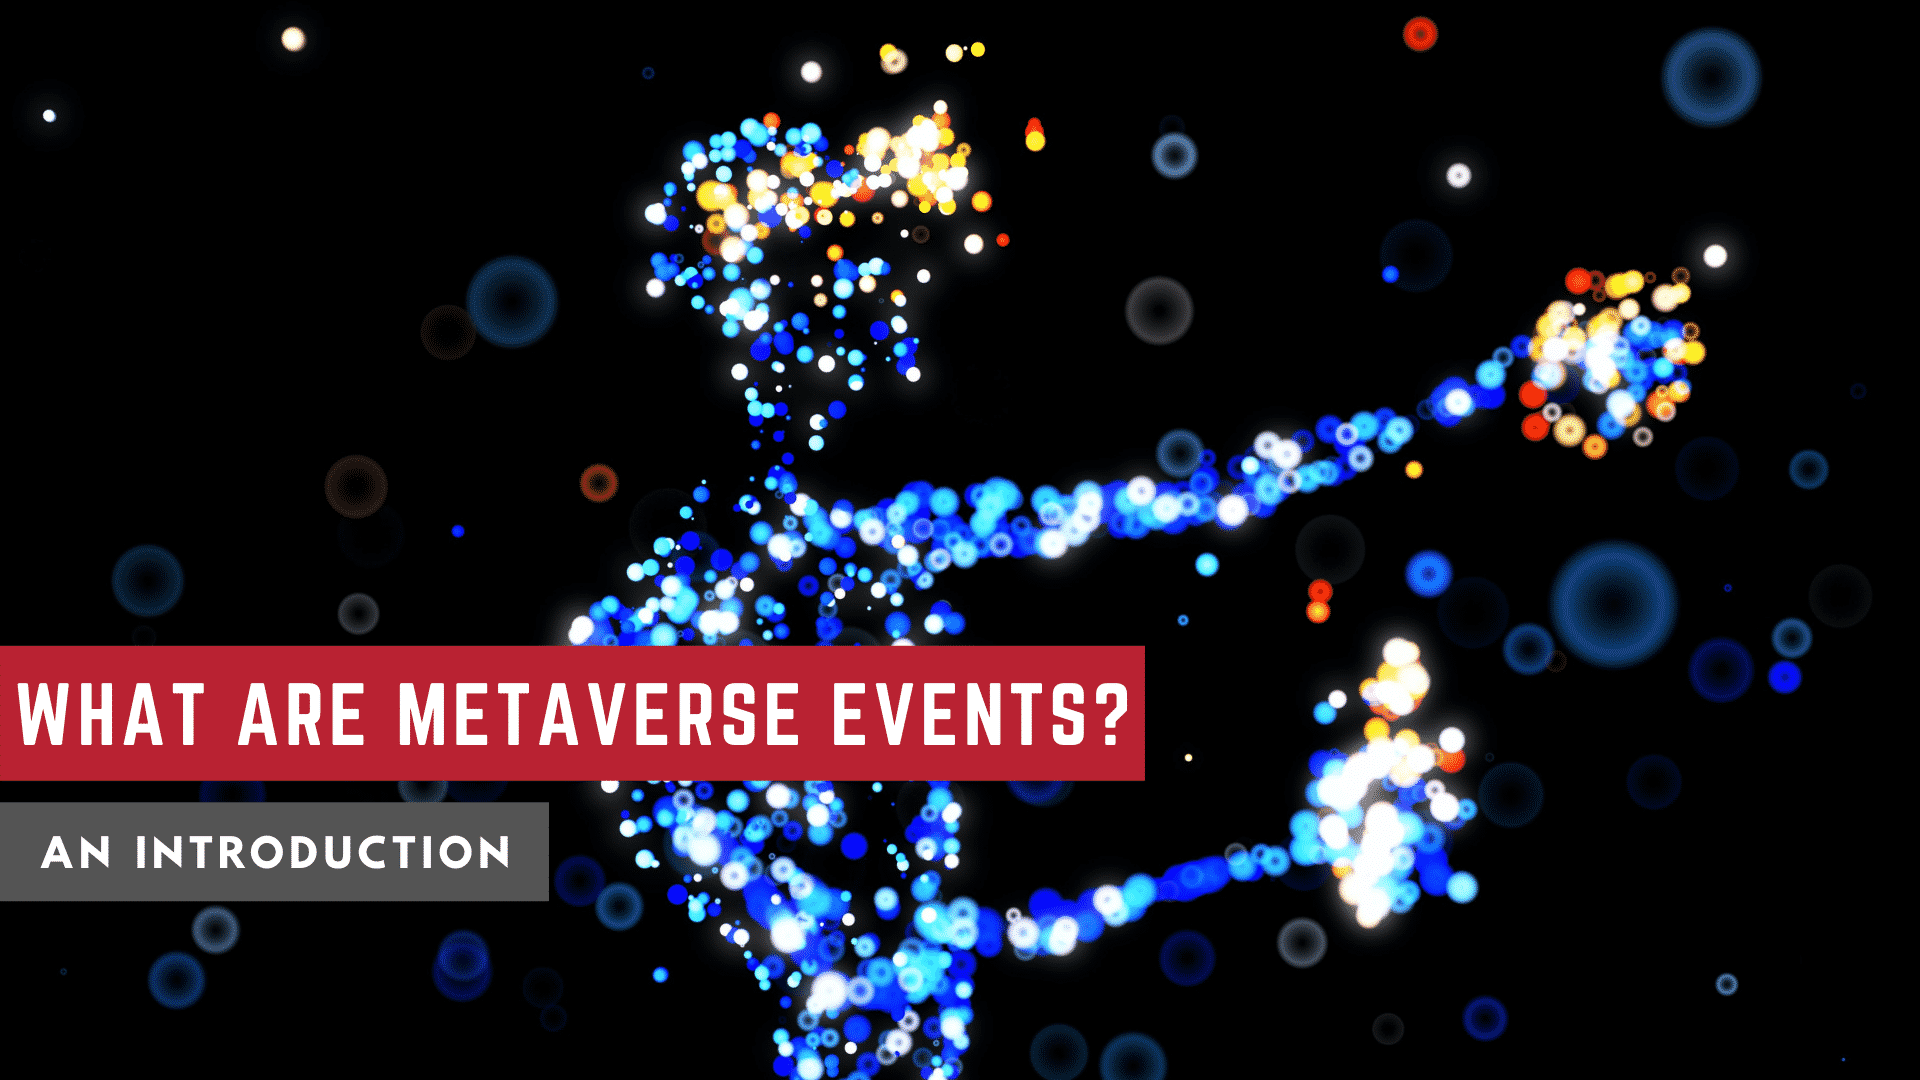 Metaverse Events: An Introduction